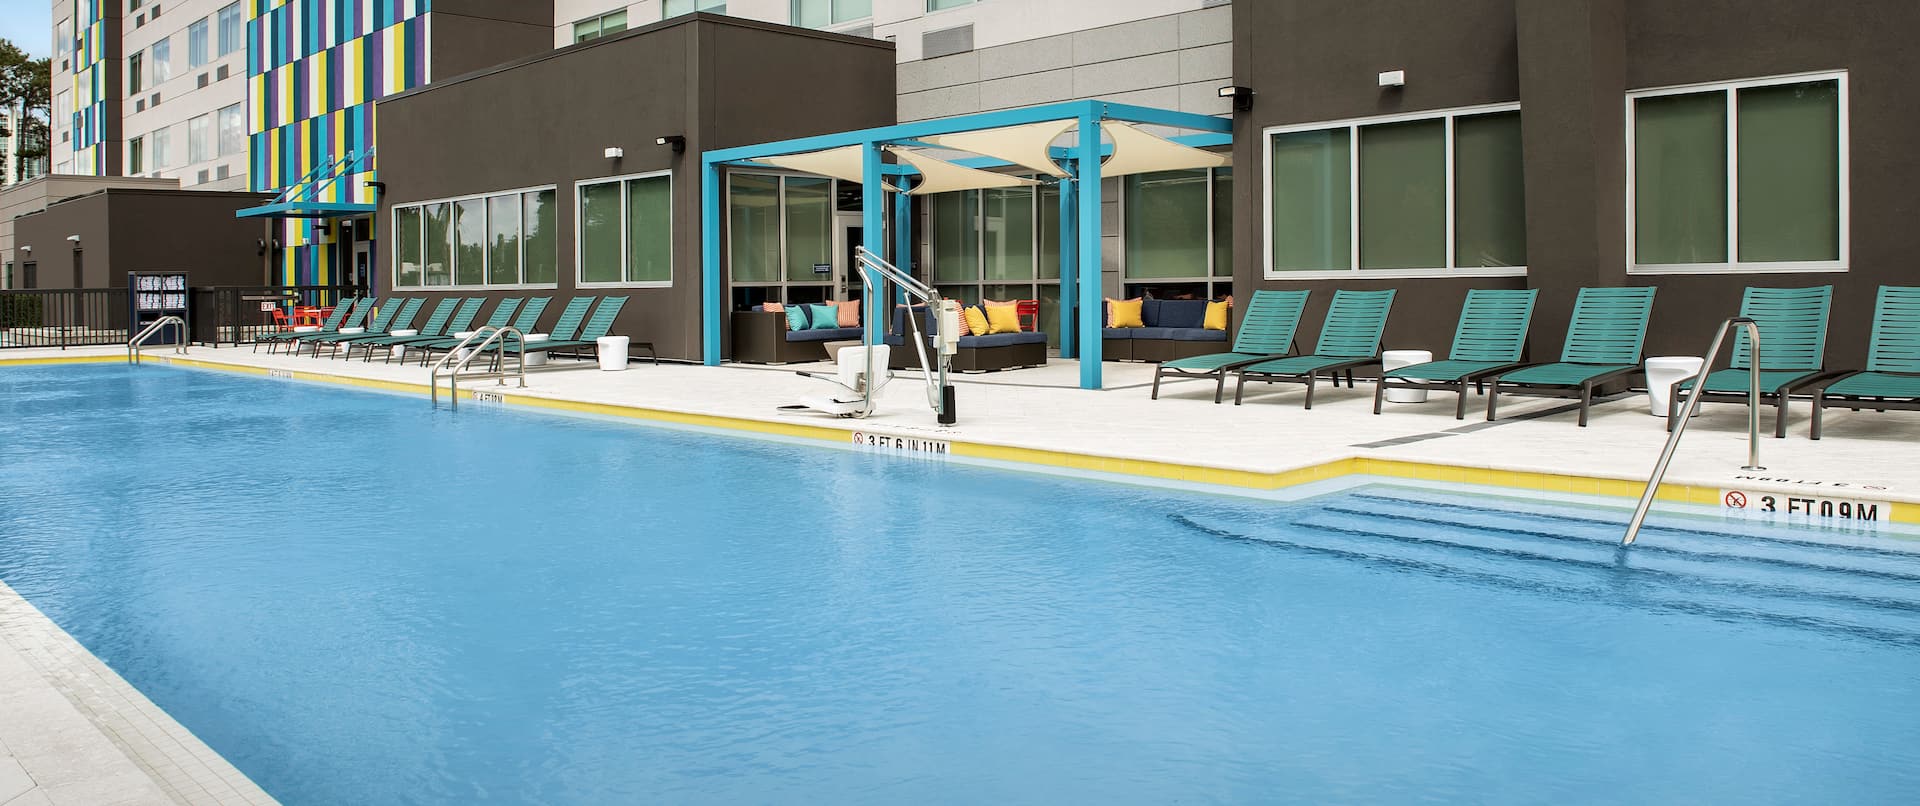 Outdoor Pool With Nearby Seating